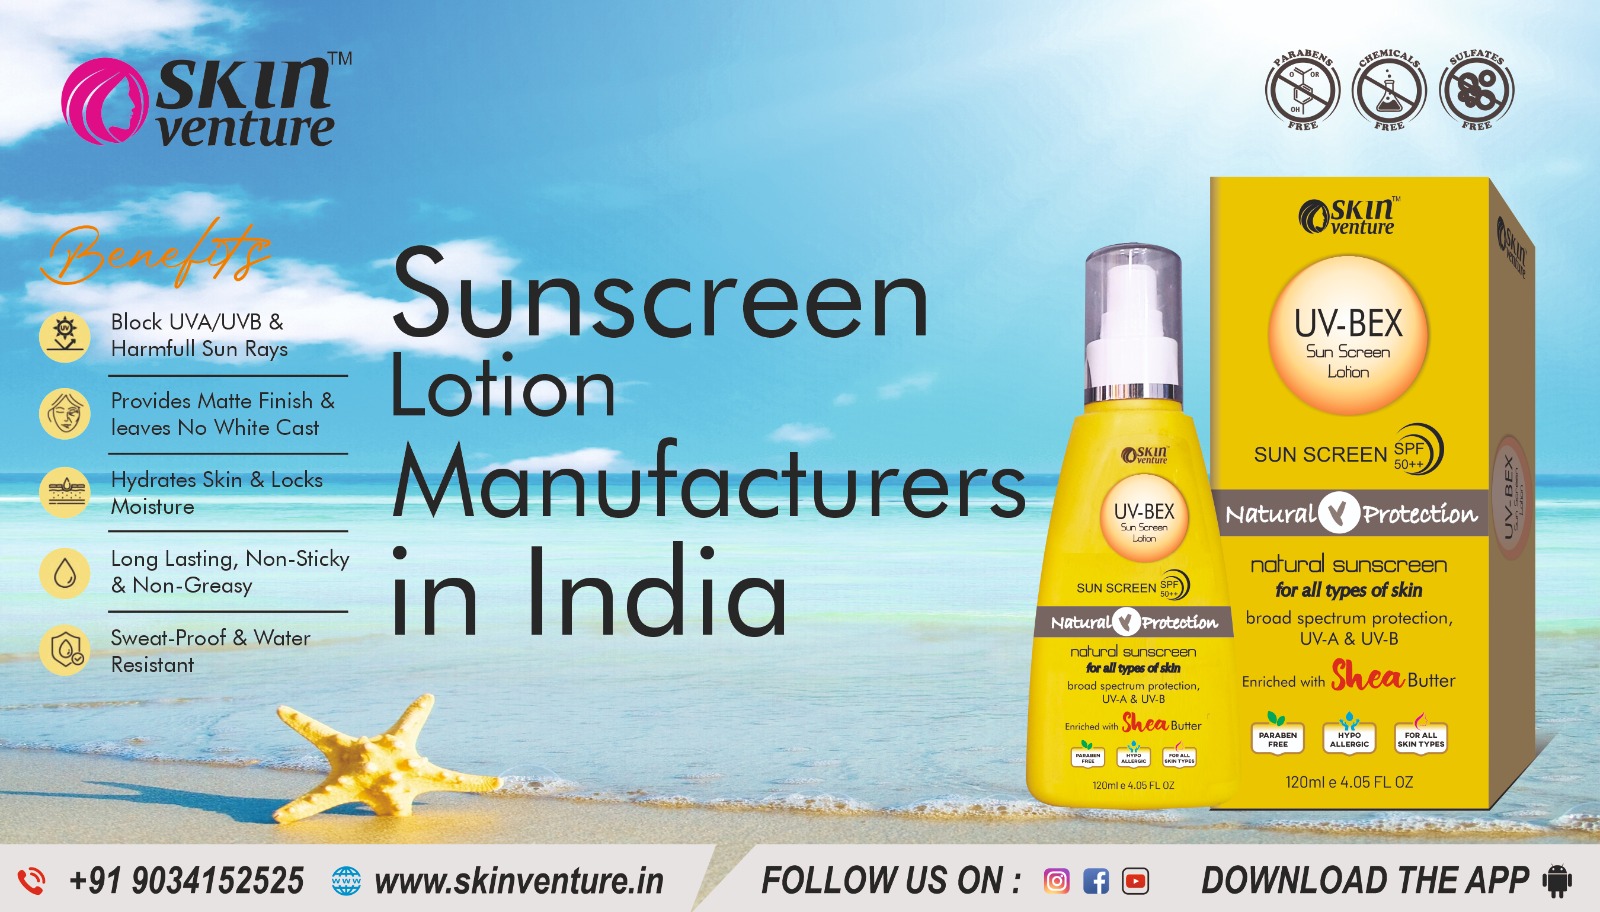 Sunscreen lotion manufacturers in India